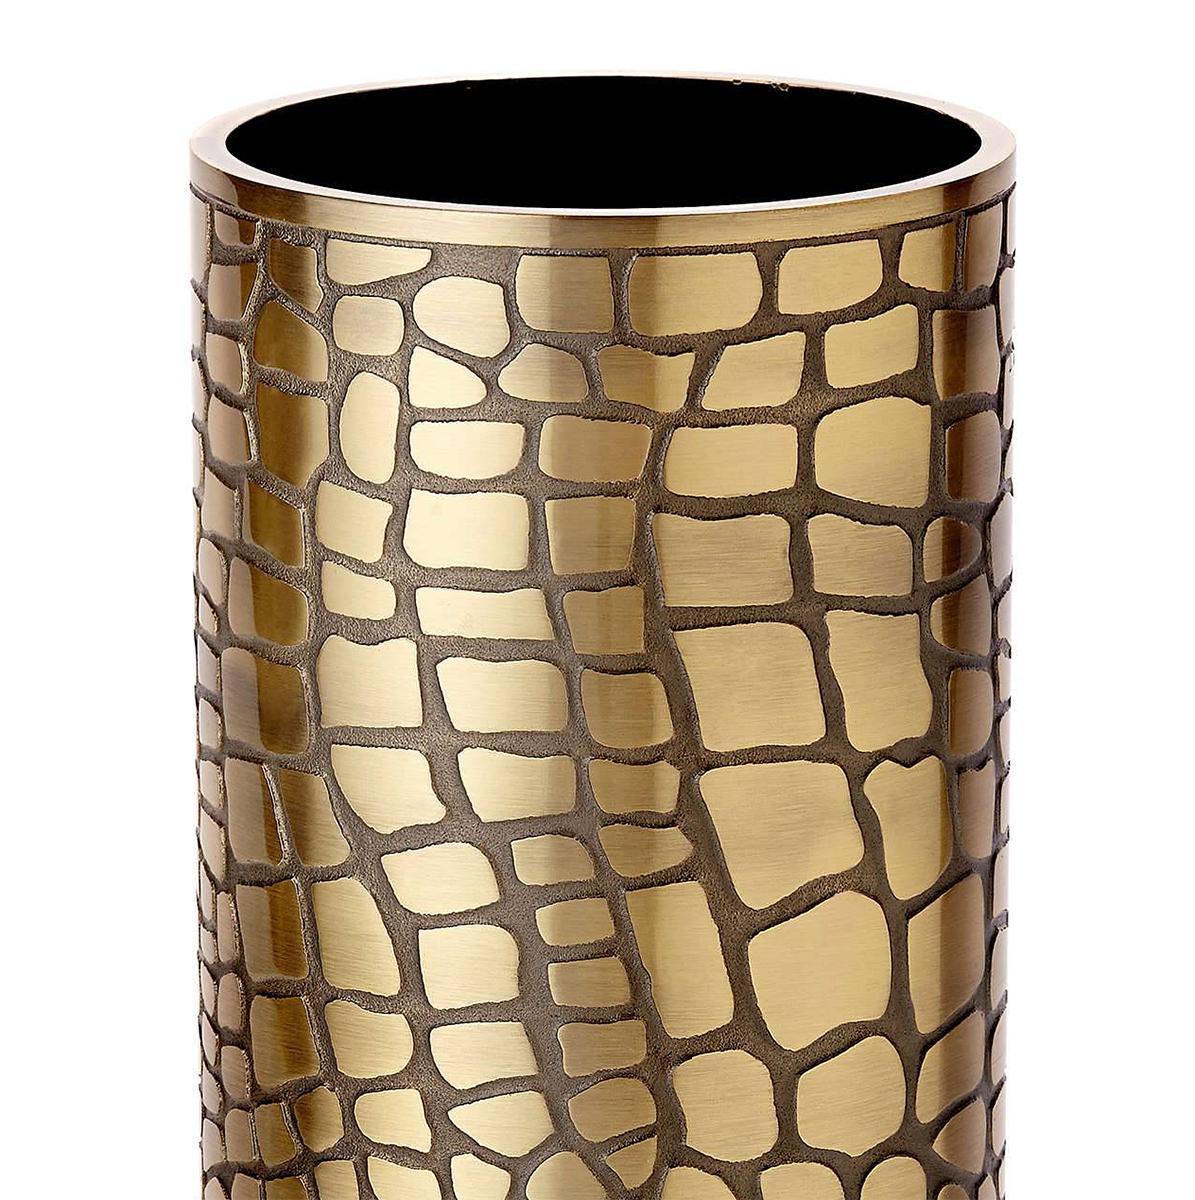 Vase Cayman brass in solid brass.
Delivered in a luxury gift box.
In diameter 12cm x H 30cm. Price: 590,00€
Also available in diameter 8cm x H 15cm. Price: 370,00€.